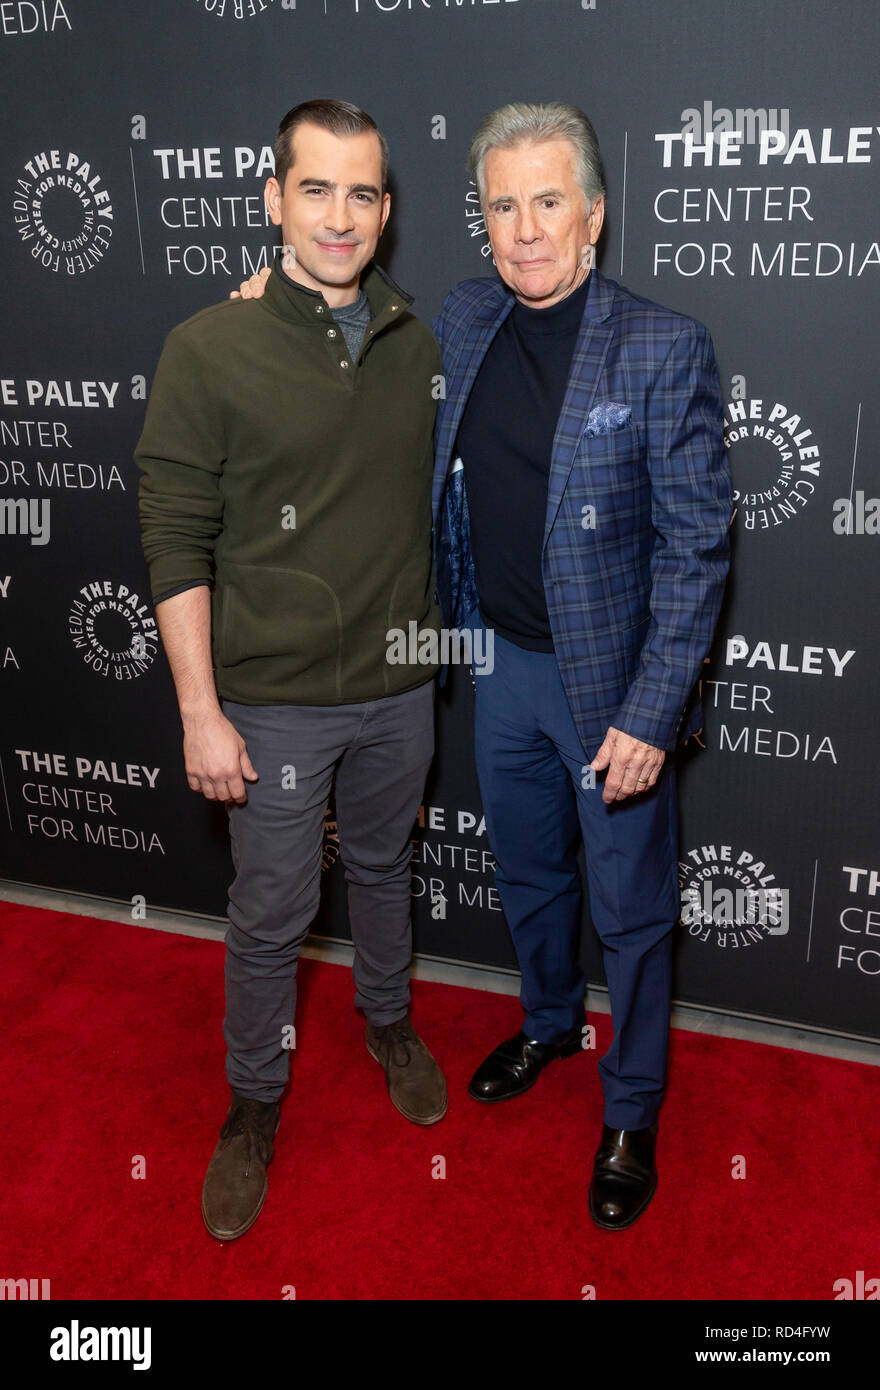 New York, NY - January 16, 2019: Callahan Walsh and John Walsh attend In Pursuit With John Walsh Screening & Conversation at The Paley Center for Media Credit: lev radin/Alamy Live News Stock Photo